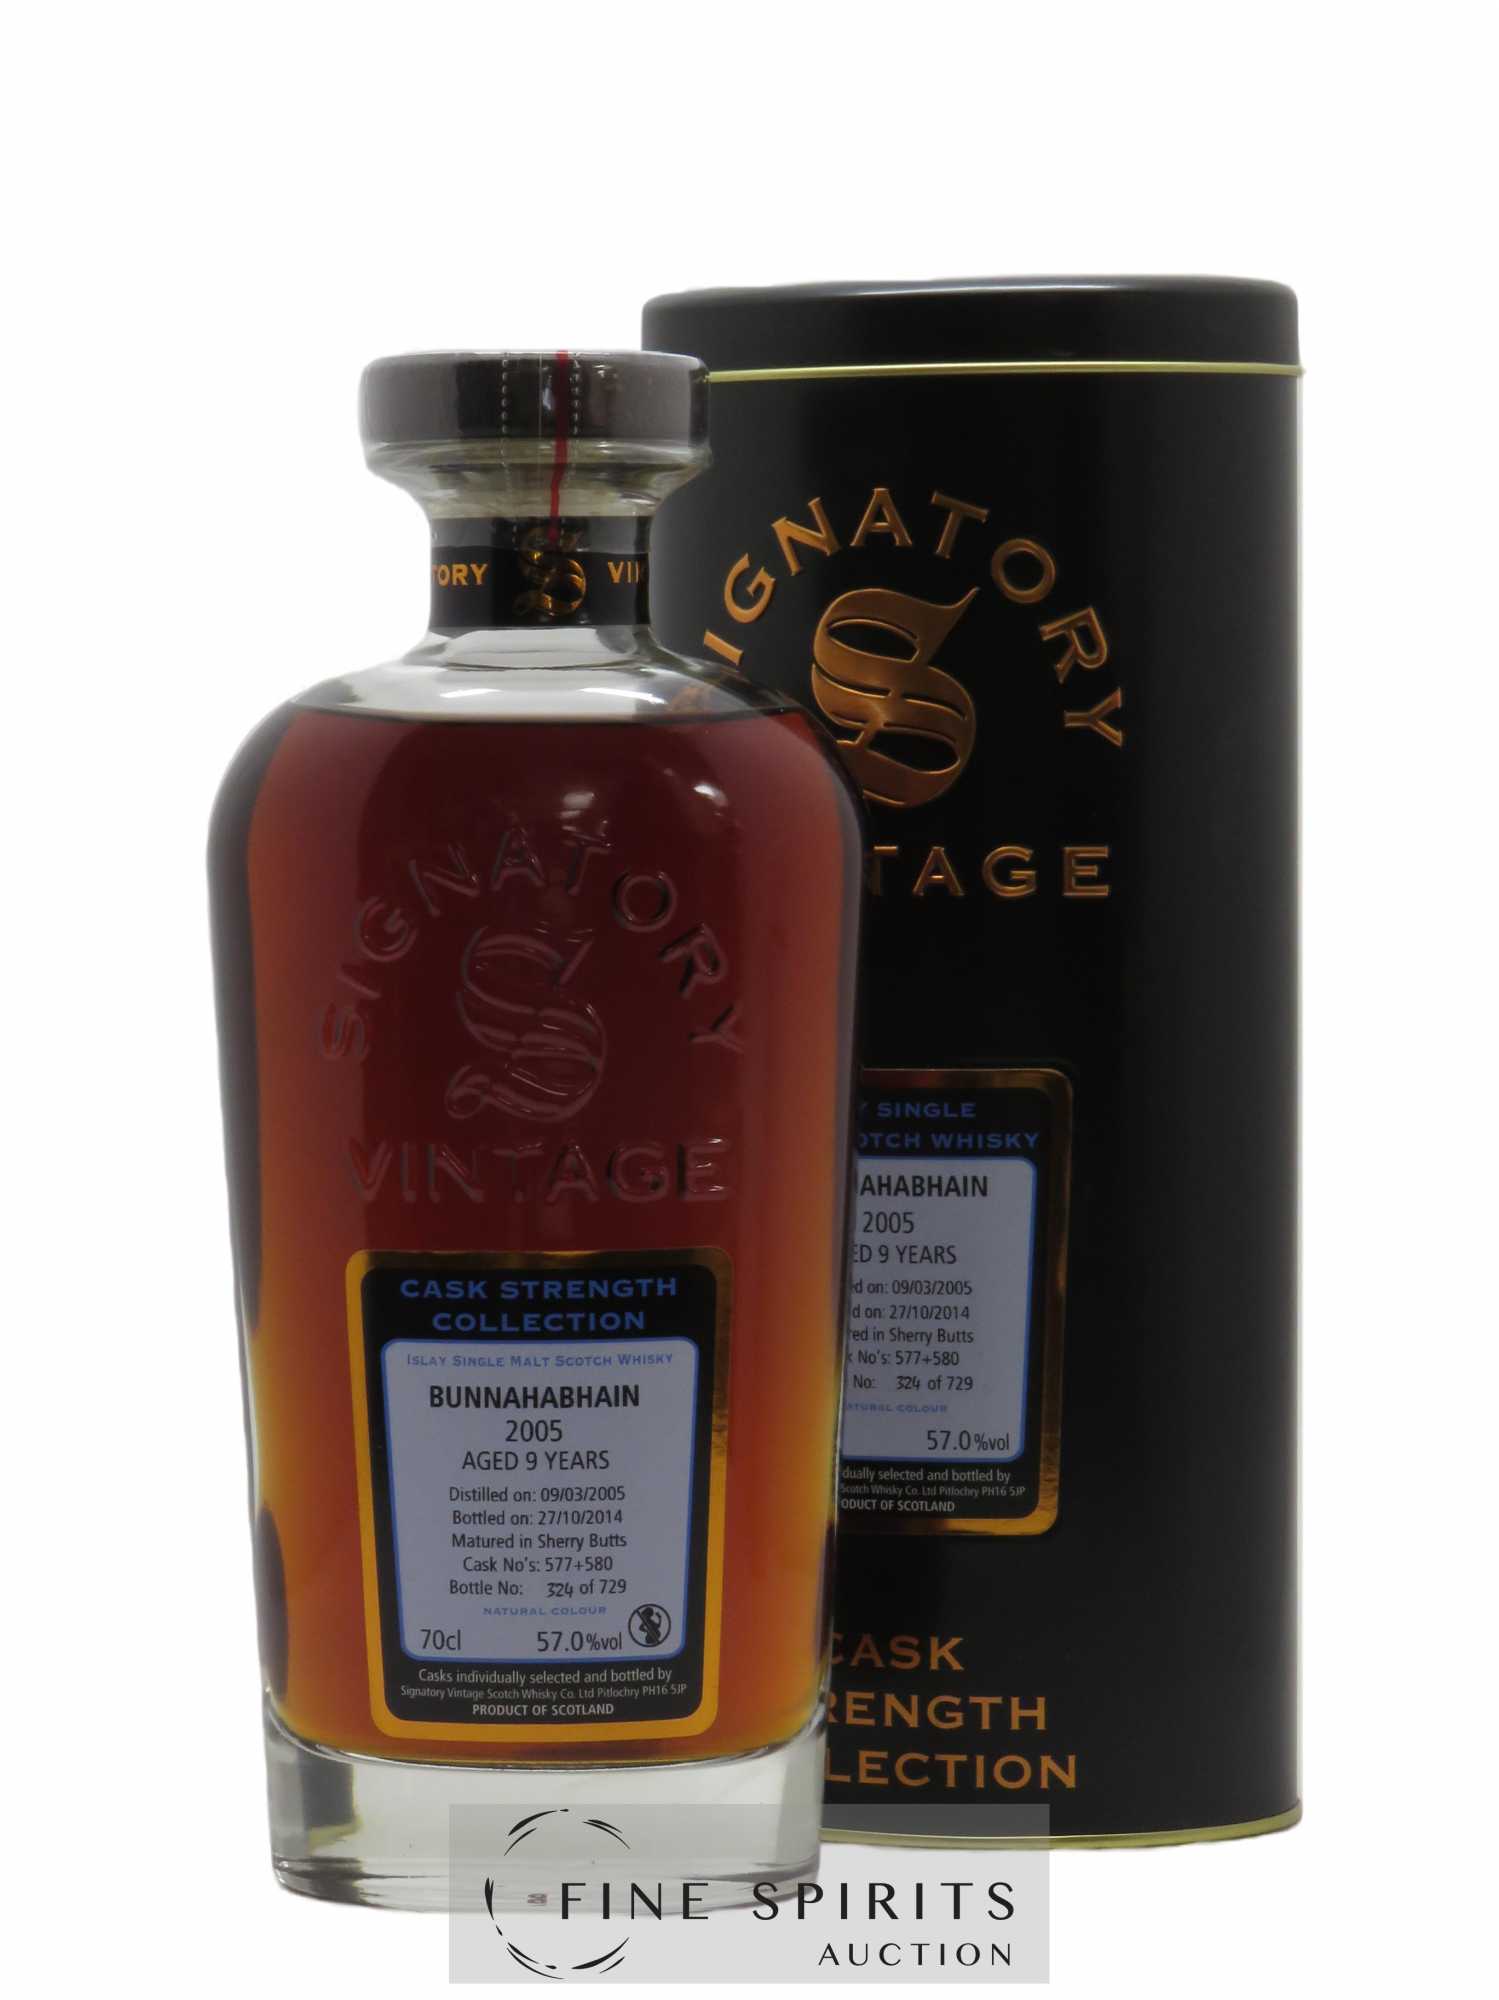 Bunnahabhain 9 years 2005 Signatory Vintage Sherry Butt Cask n577 580 - One of 729 - bottled 2014 Cask Strength Collection